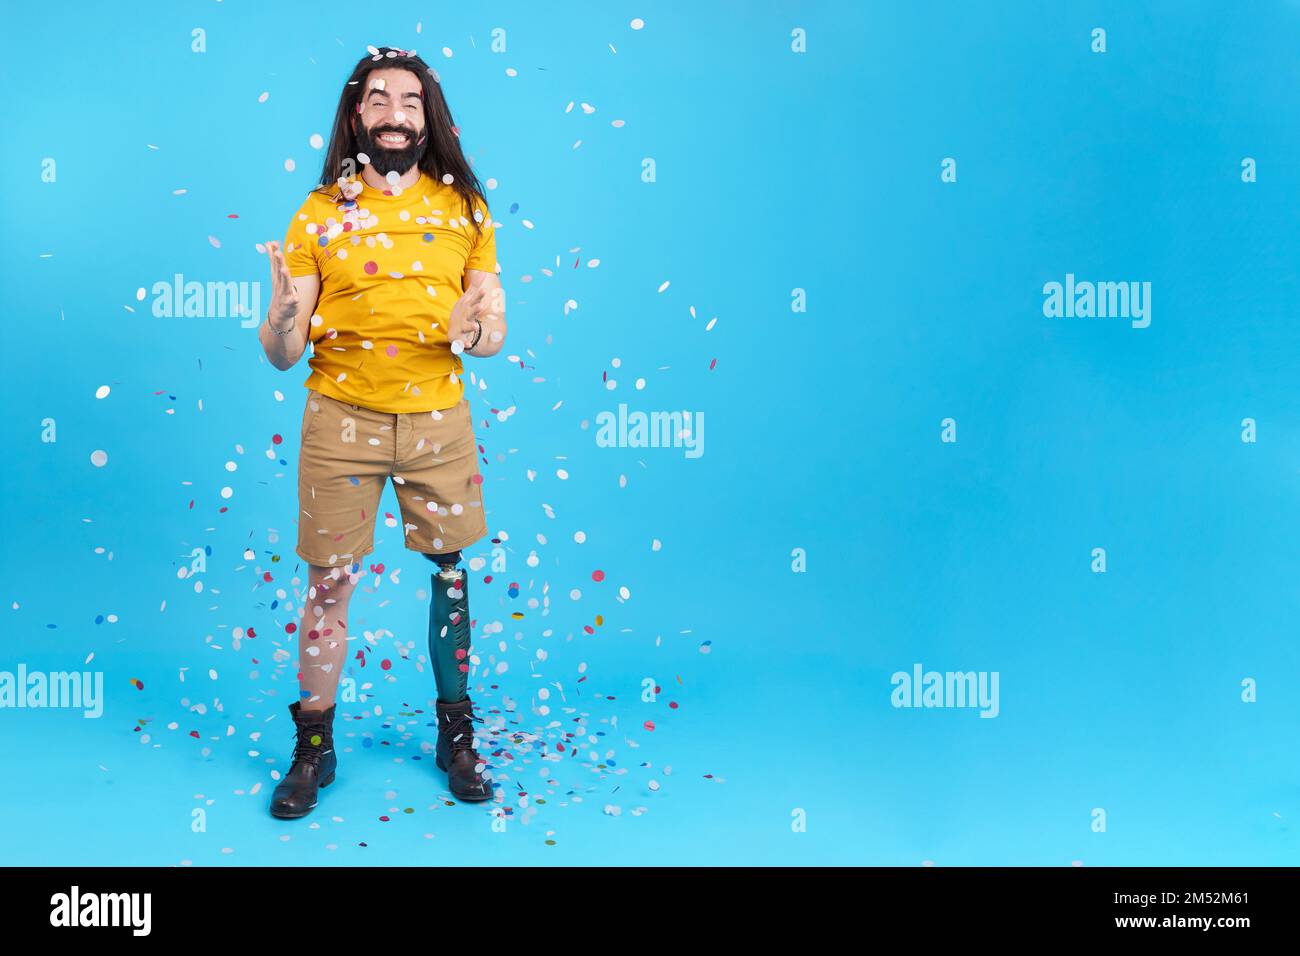 Happy man with a leg prosthesis surrounded by flying confetti Stock Photo